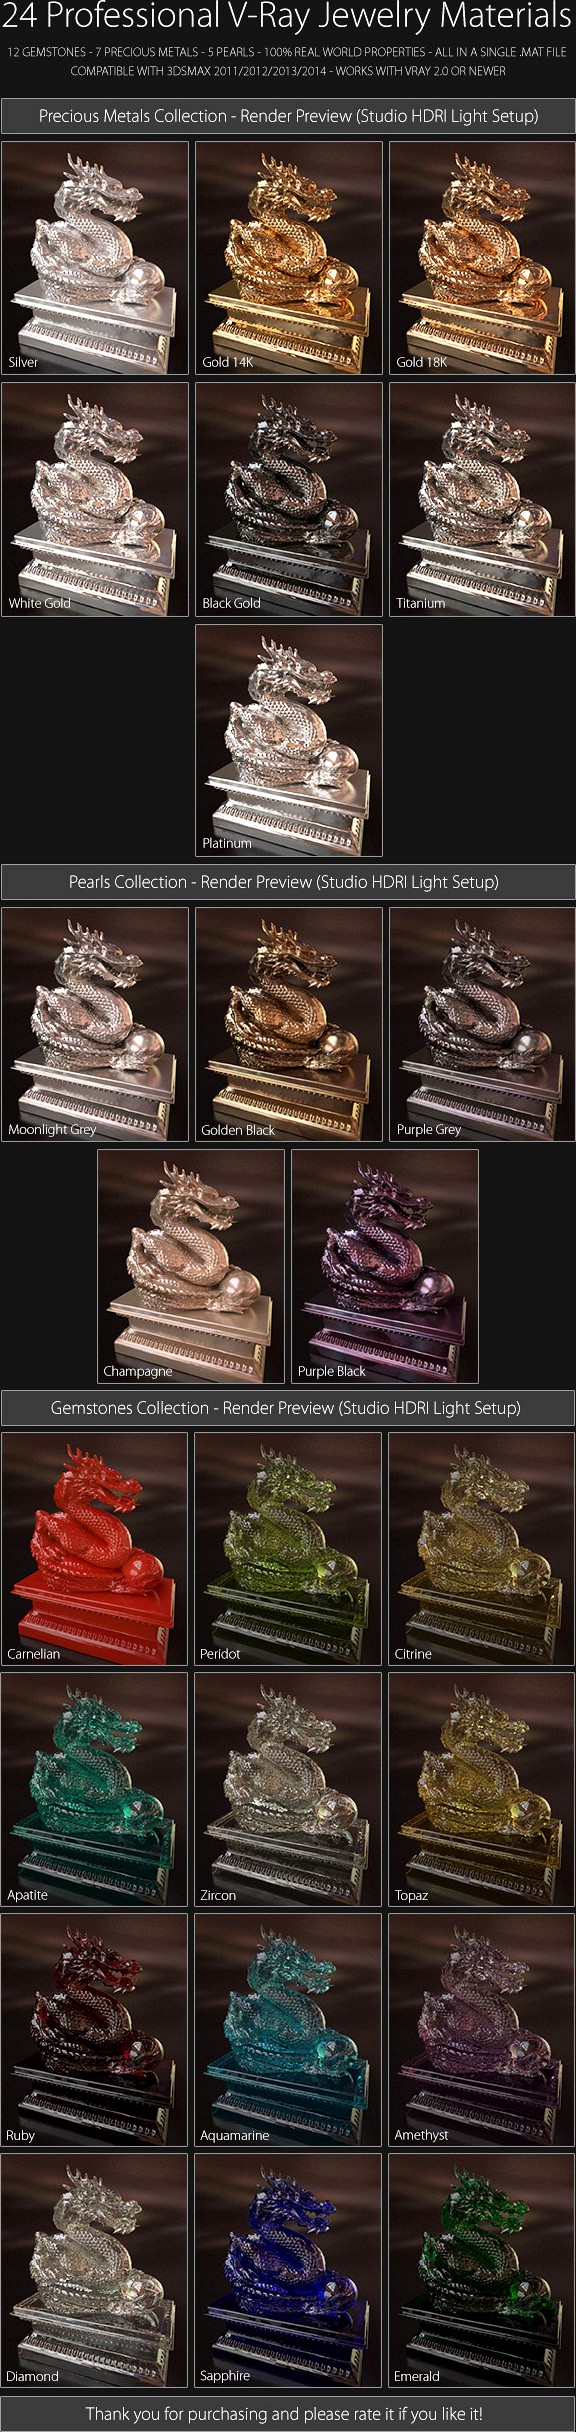 24 Professional V-Ray Jewelry Materials